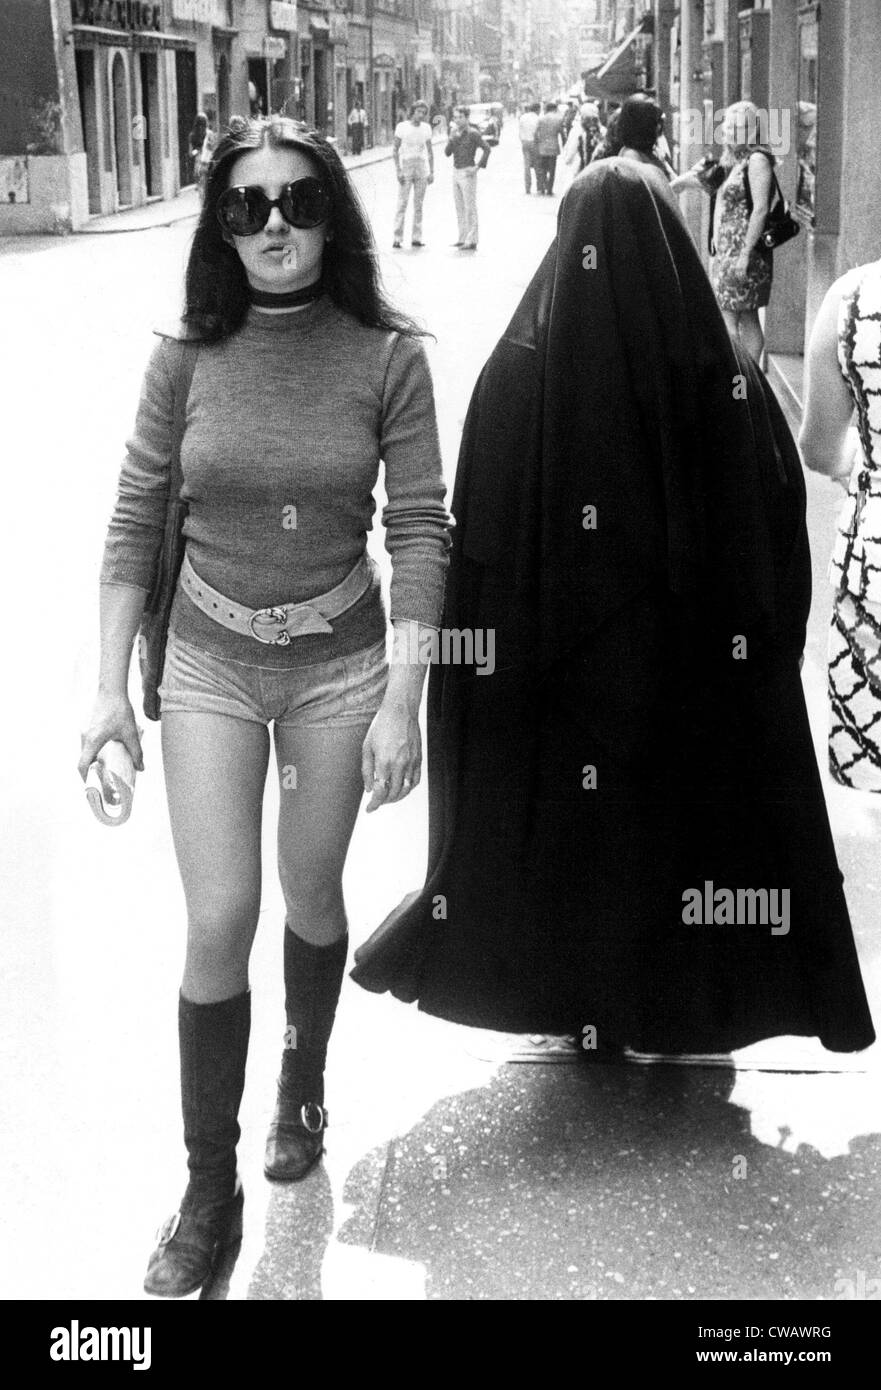 Young girl in  hot pants and a nun on the Via Frattina, Rome Italy, 7/19/71. Courtesy: CSU Archives / Everett Collection Stock Photo